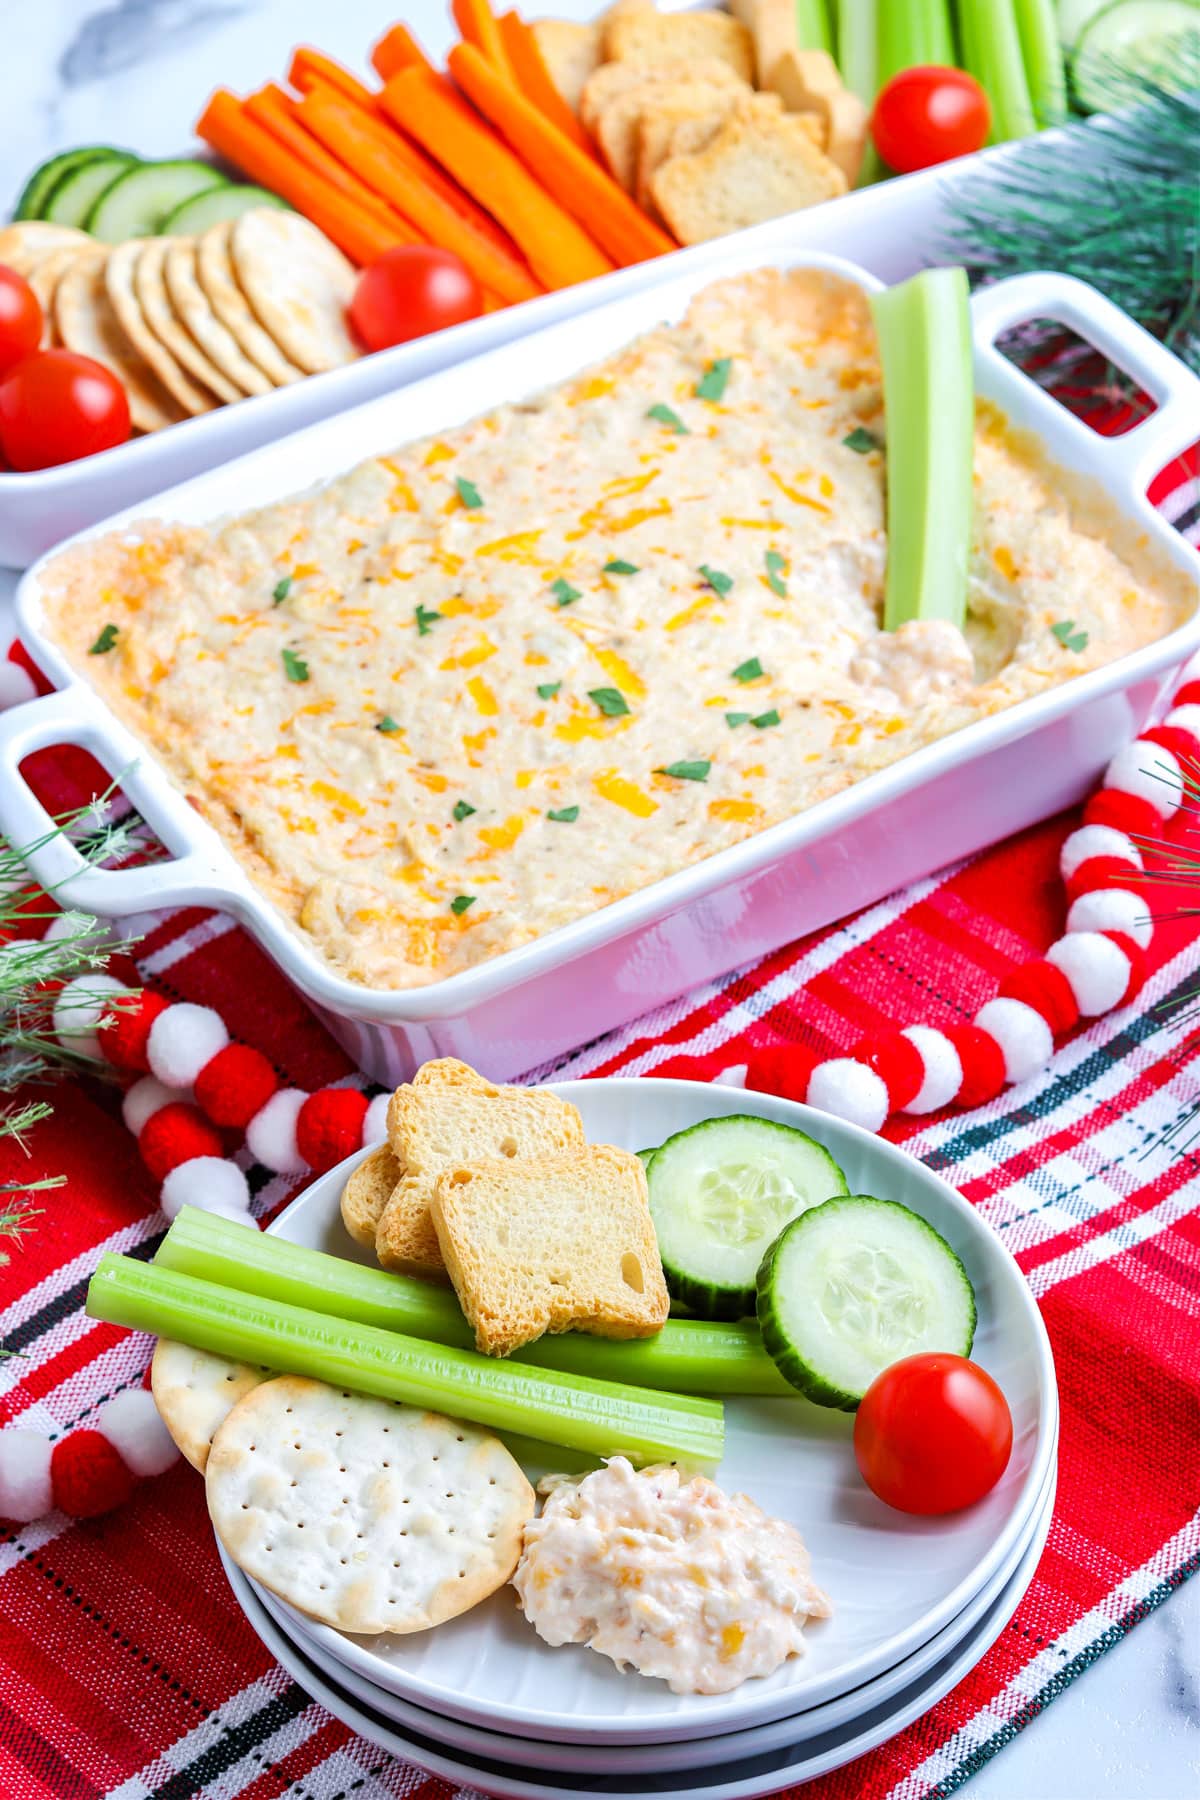 Some of the finished Crab Dip on a white plate along with dippers.